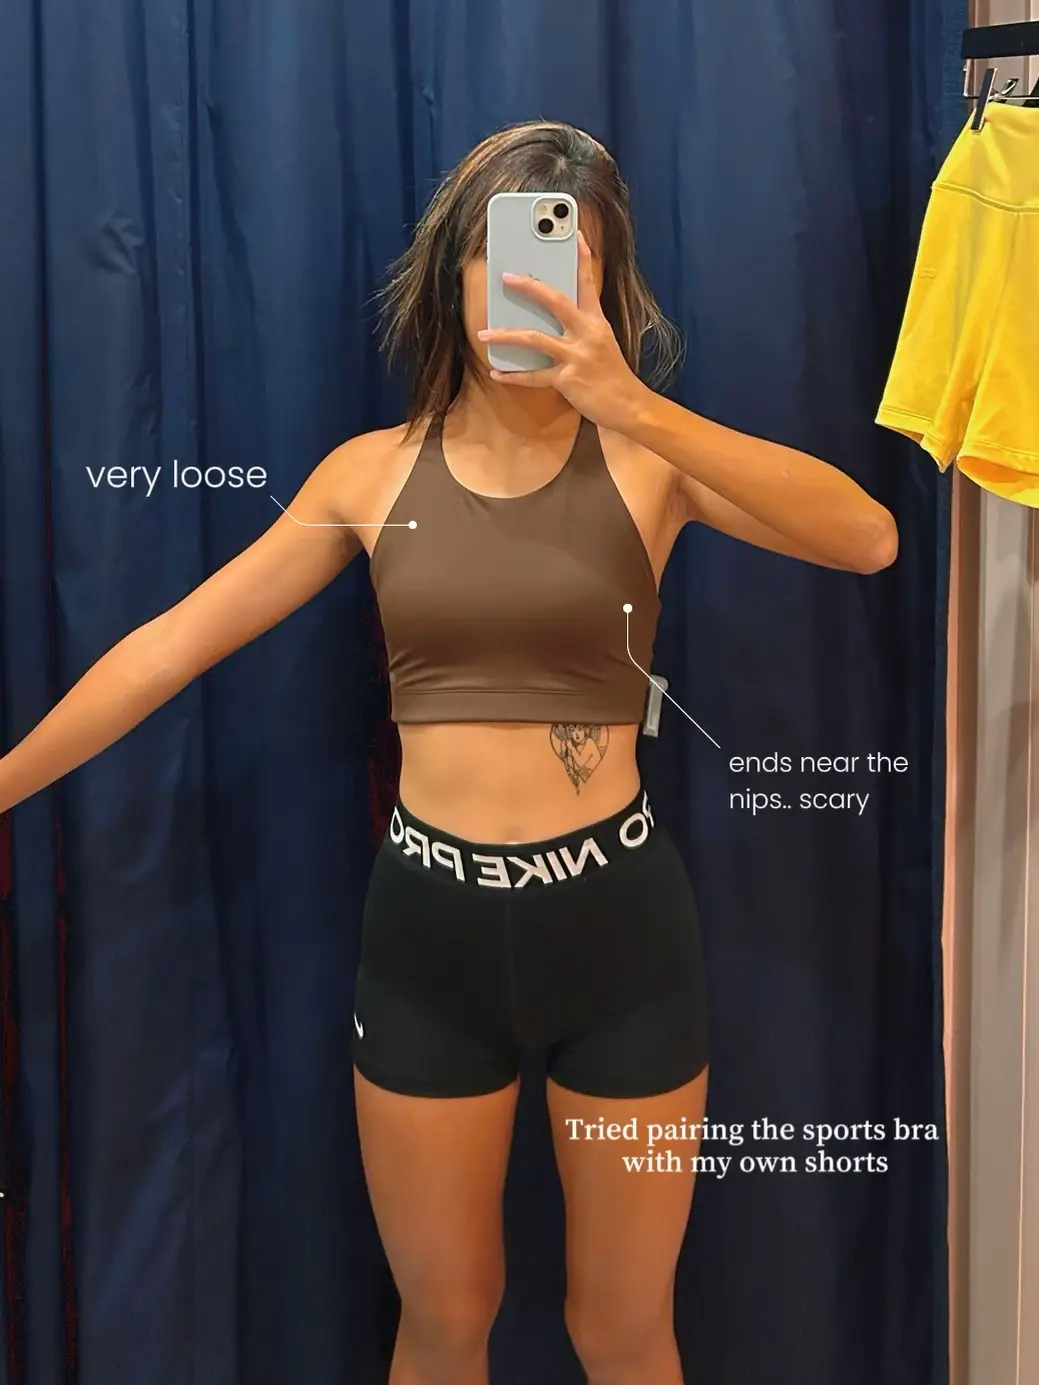 Bonnie's Strappy Large Bust Sports Bra - Small